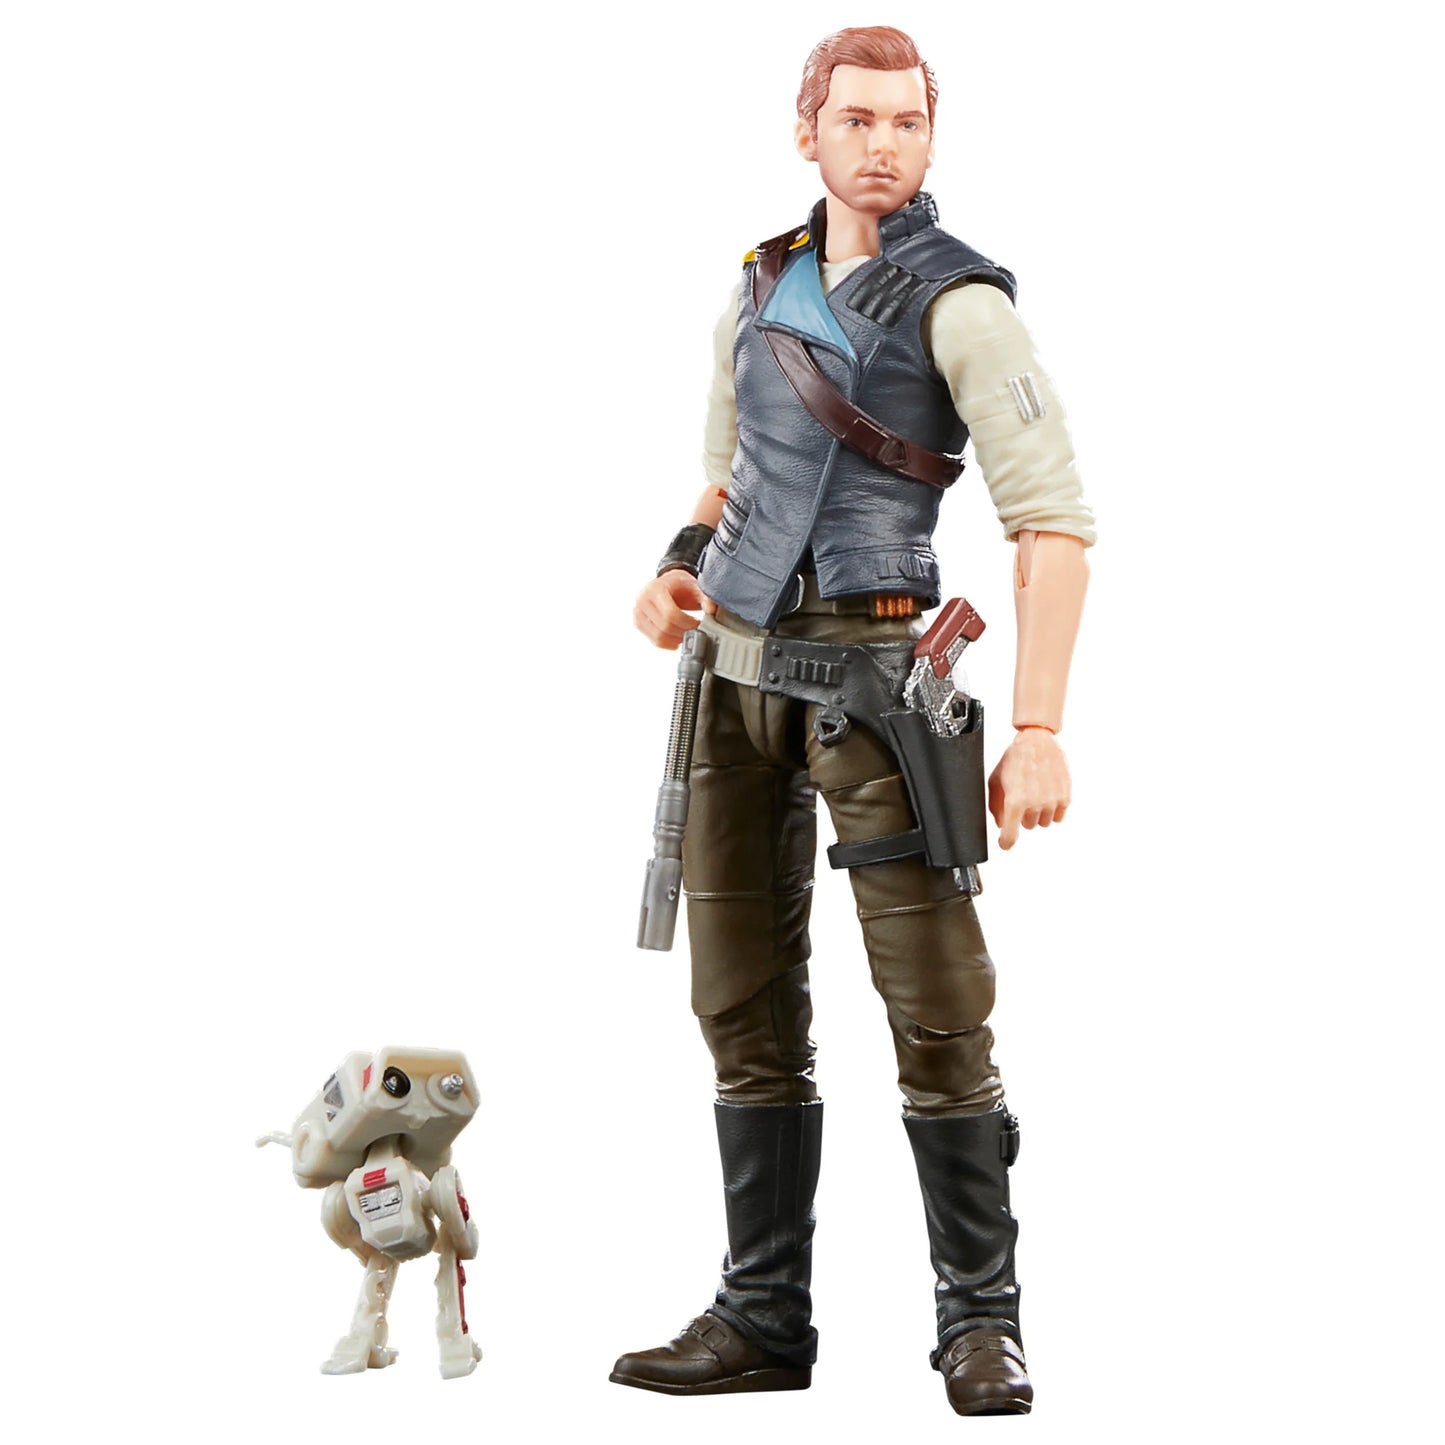 
                  
                    Star Wars The Black Series Cal Kestis action figure, featuring the character from Star Wars Jedi: Survivor. The figure comes with two character-inspired accessories and offers multiple points of articulation for dynamic posing.
                  
                